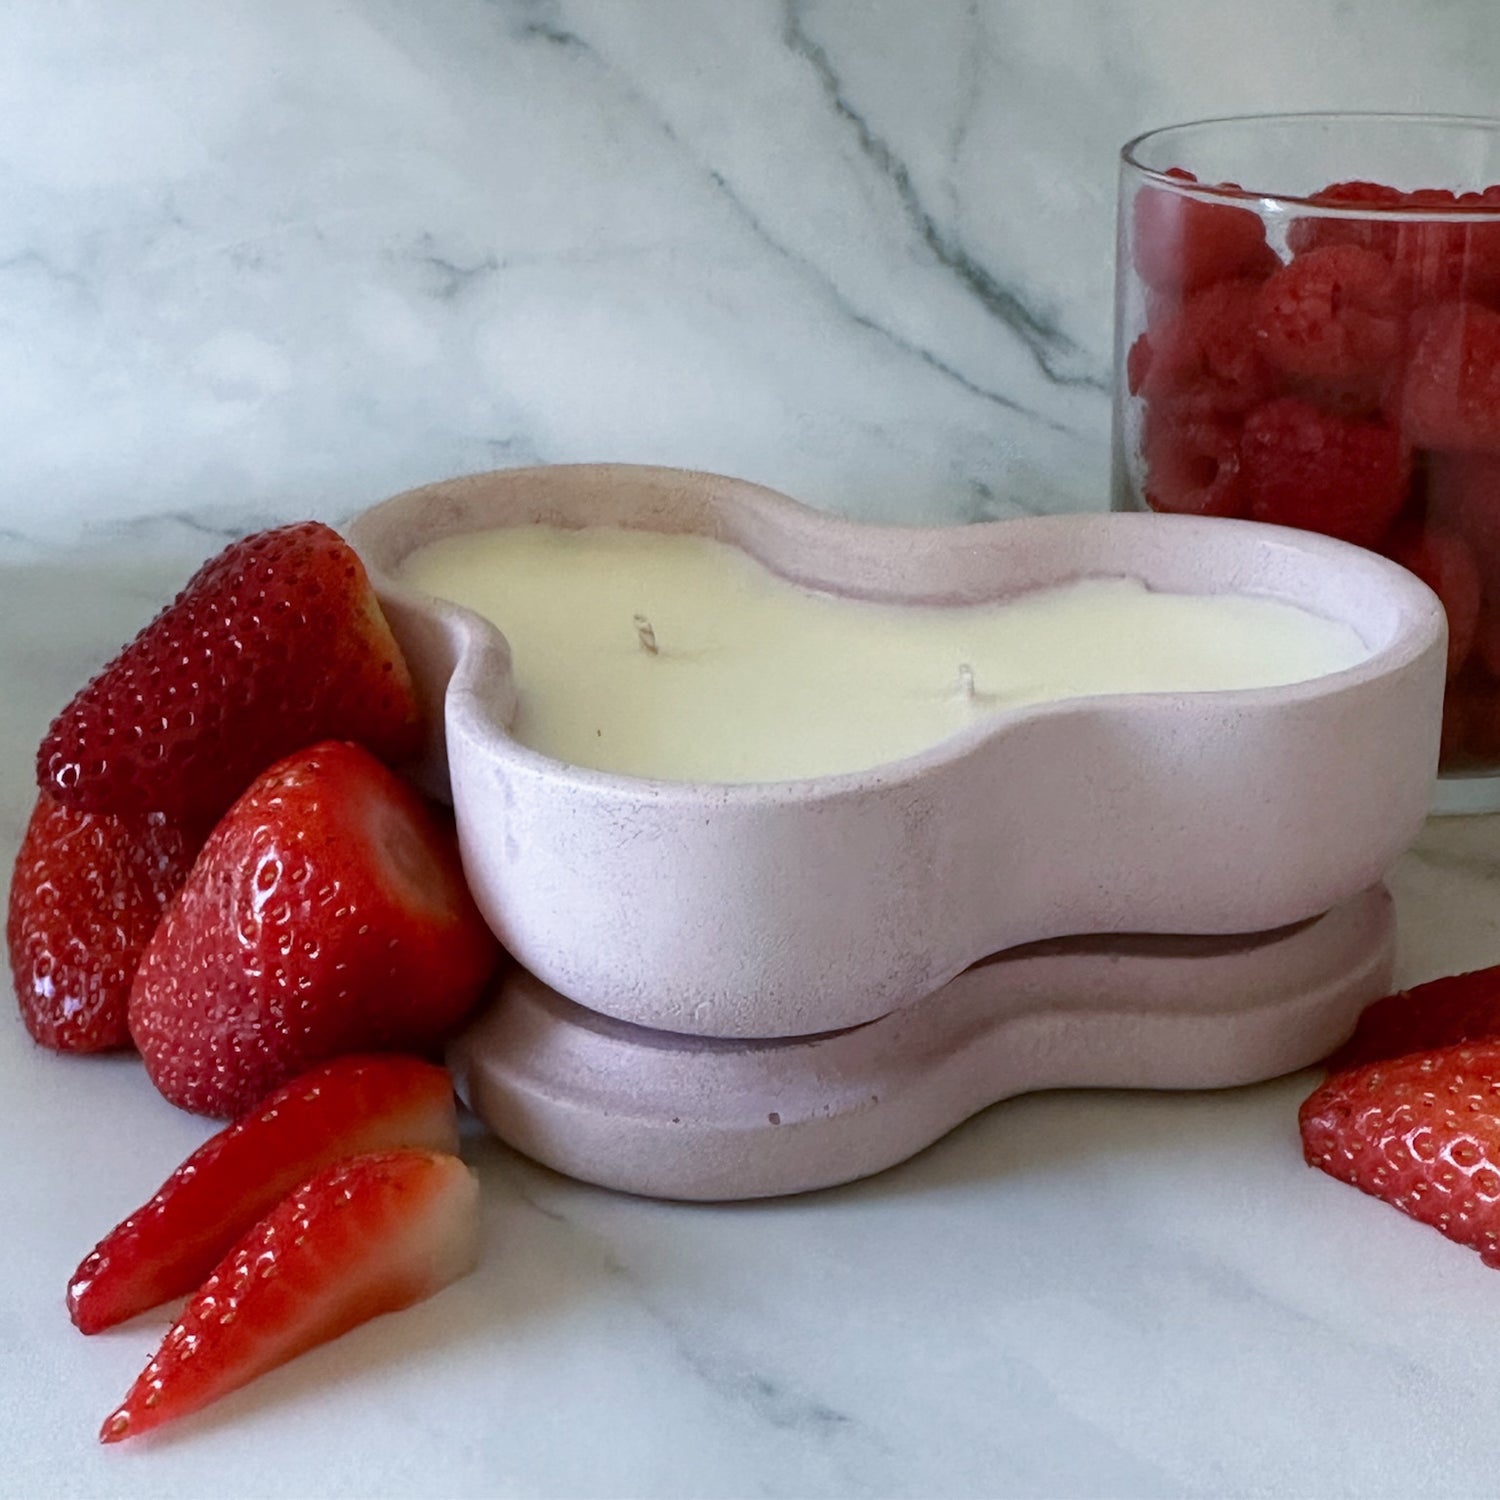 A heart-shaped light purple concrete candle jar with two cotton wicks, resting on its lid. Surrounding the candle are fresh strawberries and a jar of raspberries against a white-grey marble background.